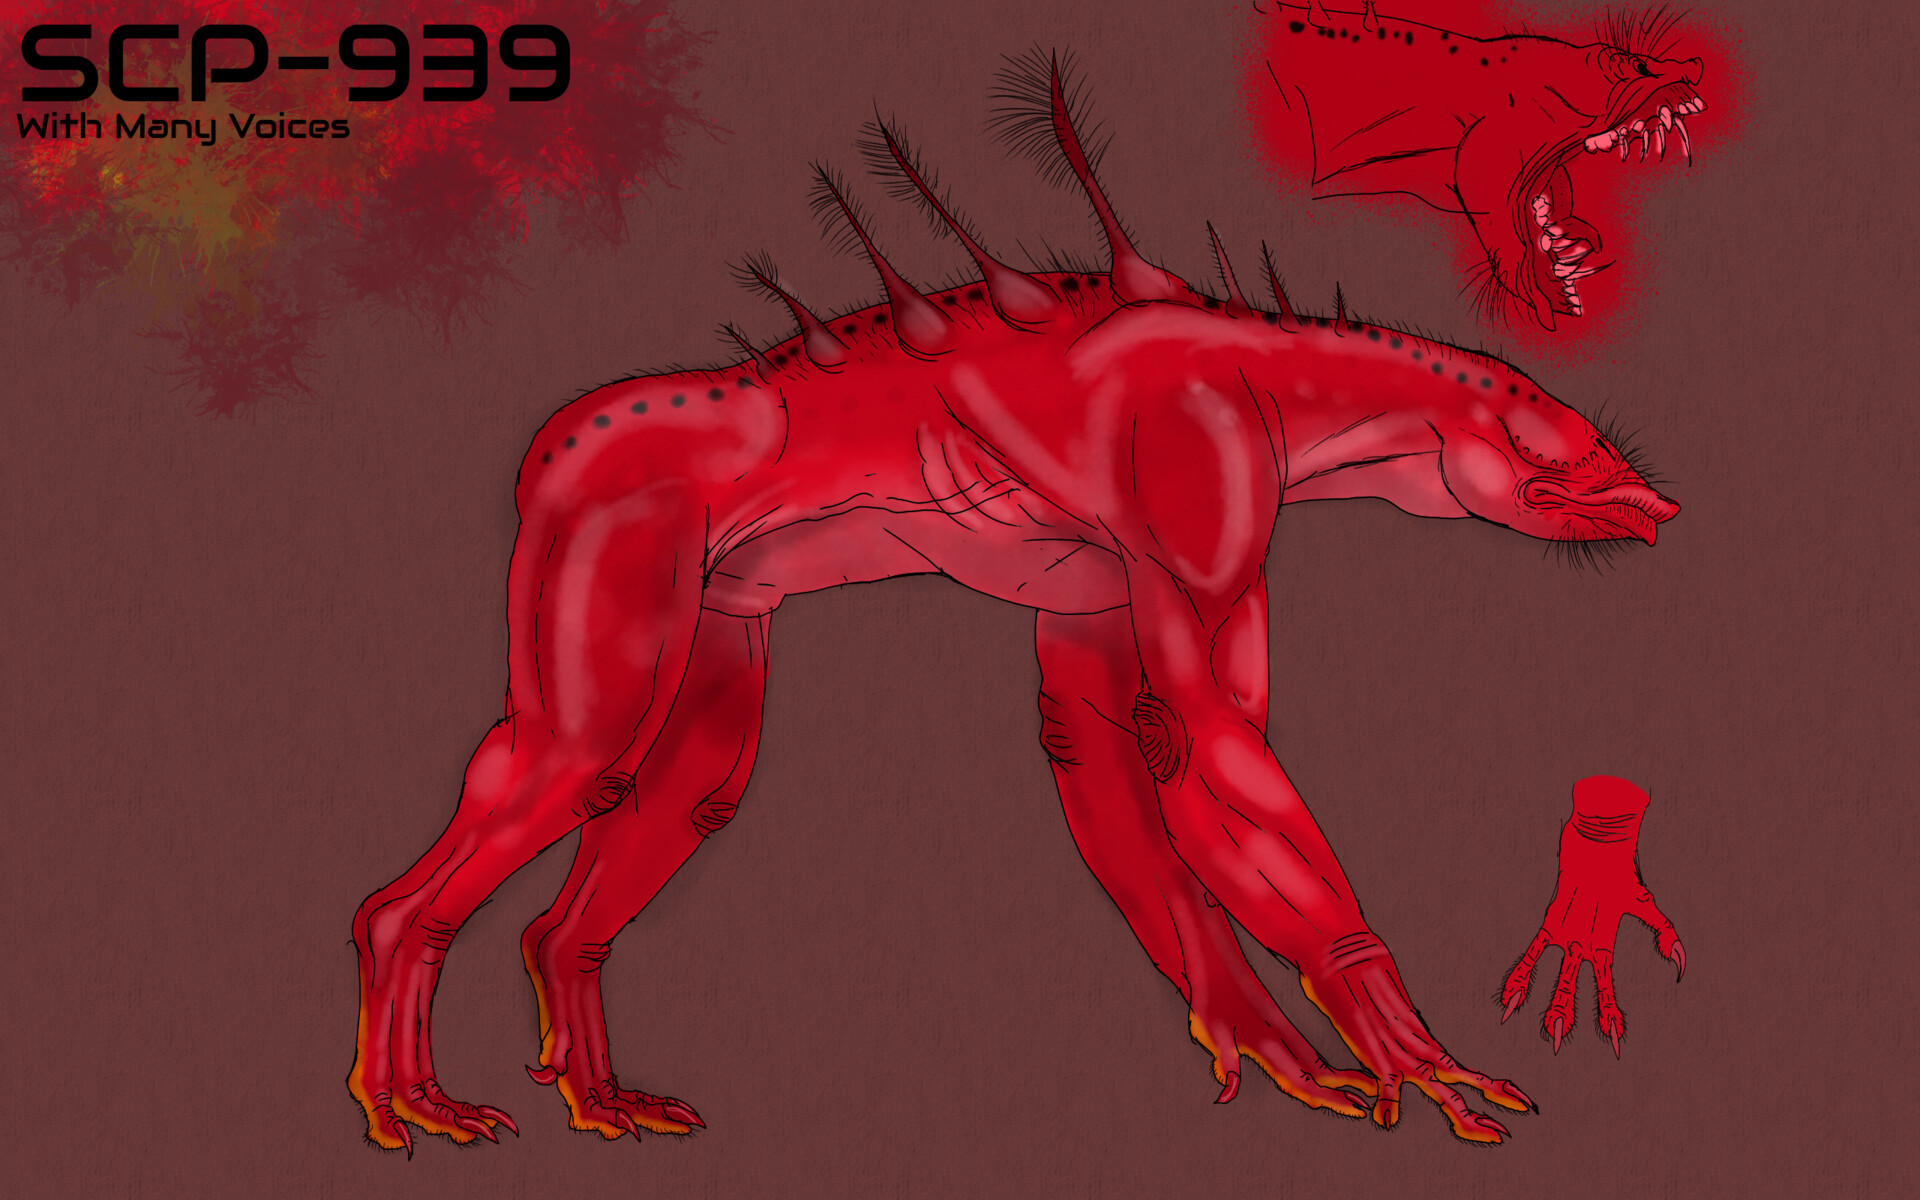 Kenneth Crooker - SCP Foundation Creature Designs